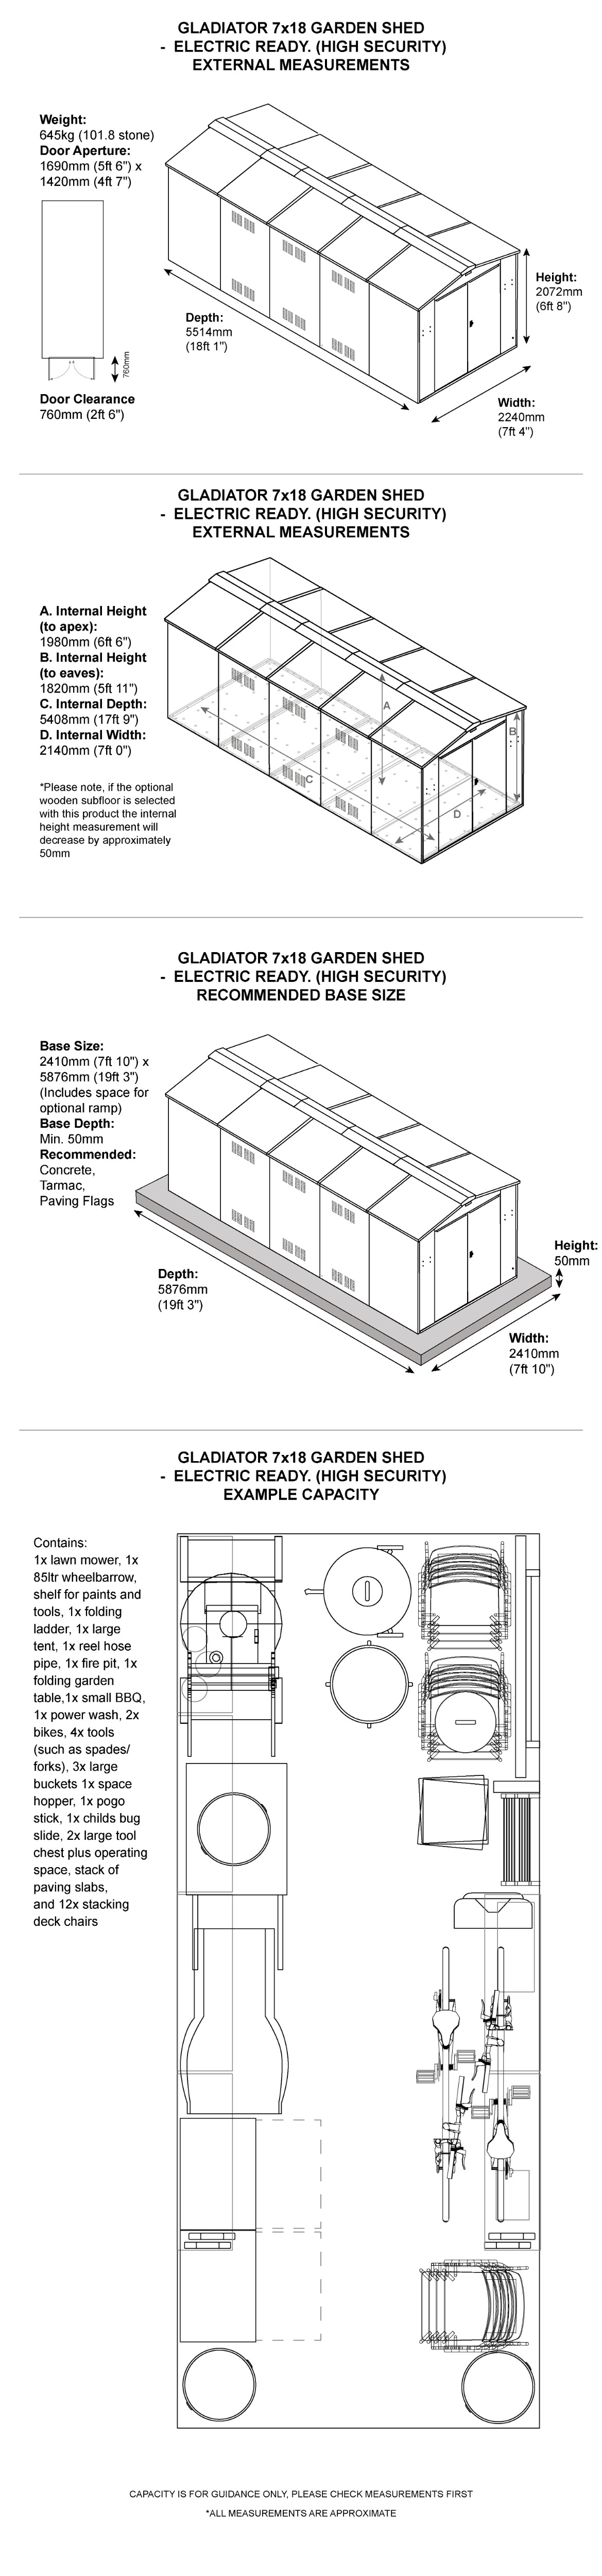 Gladiator P3 Garden Shed Dimensions